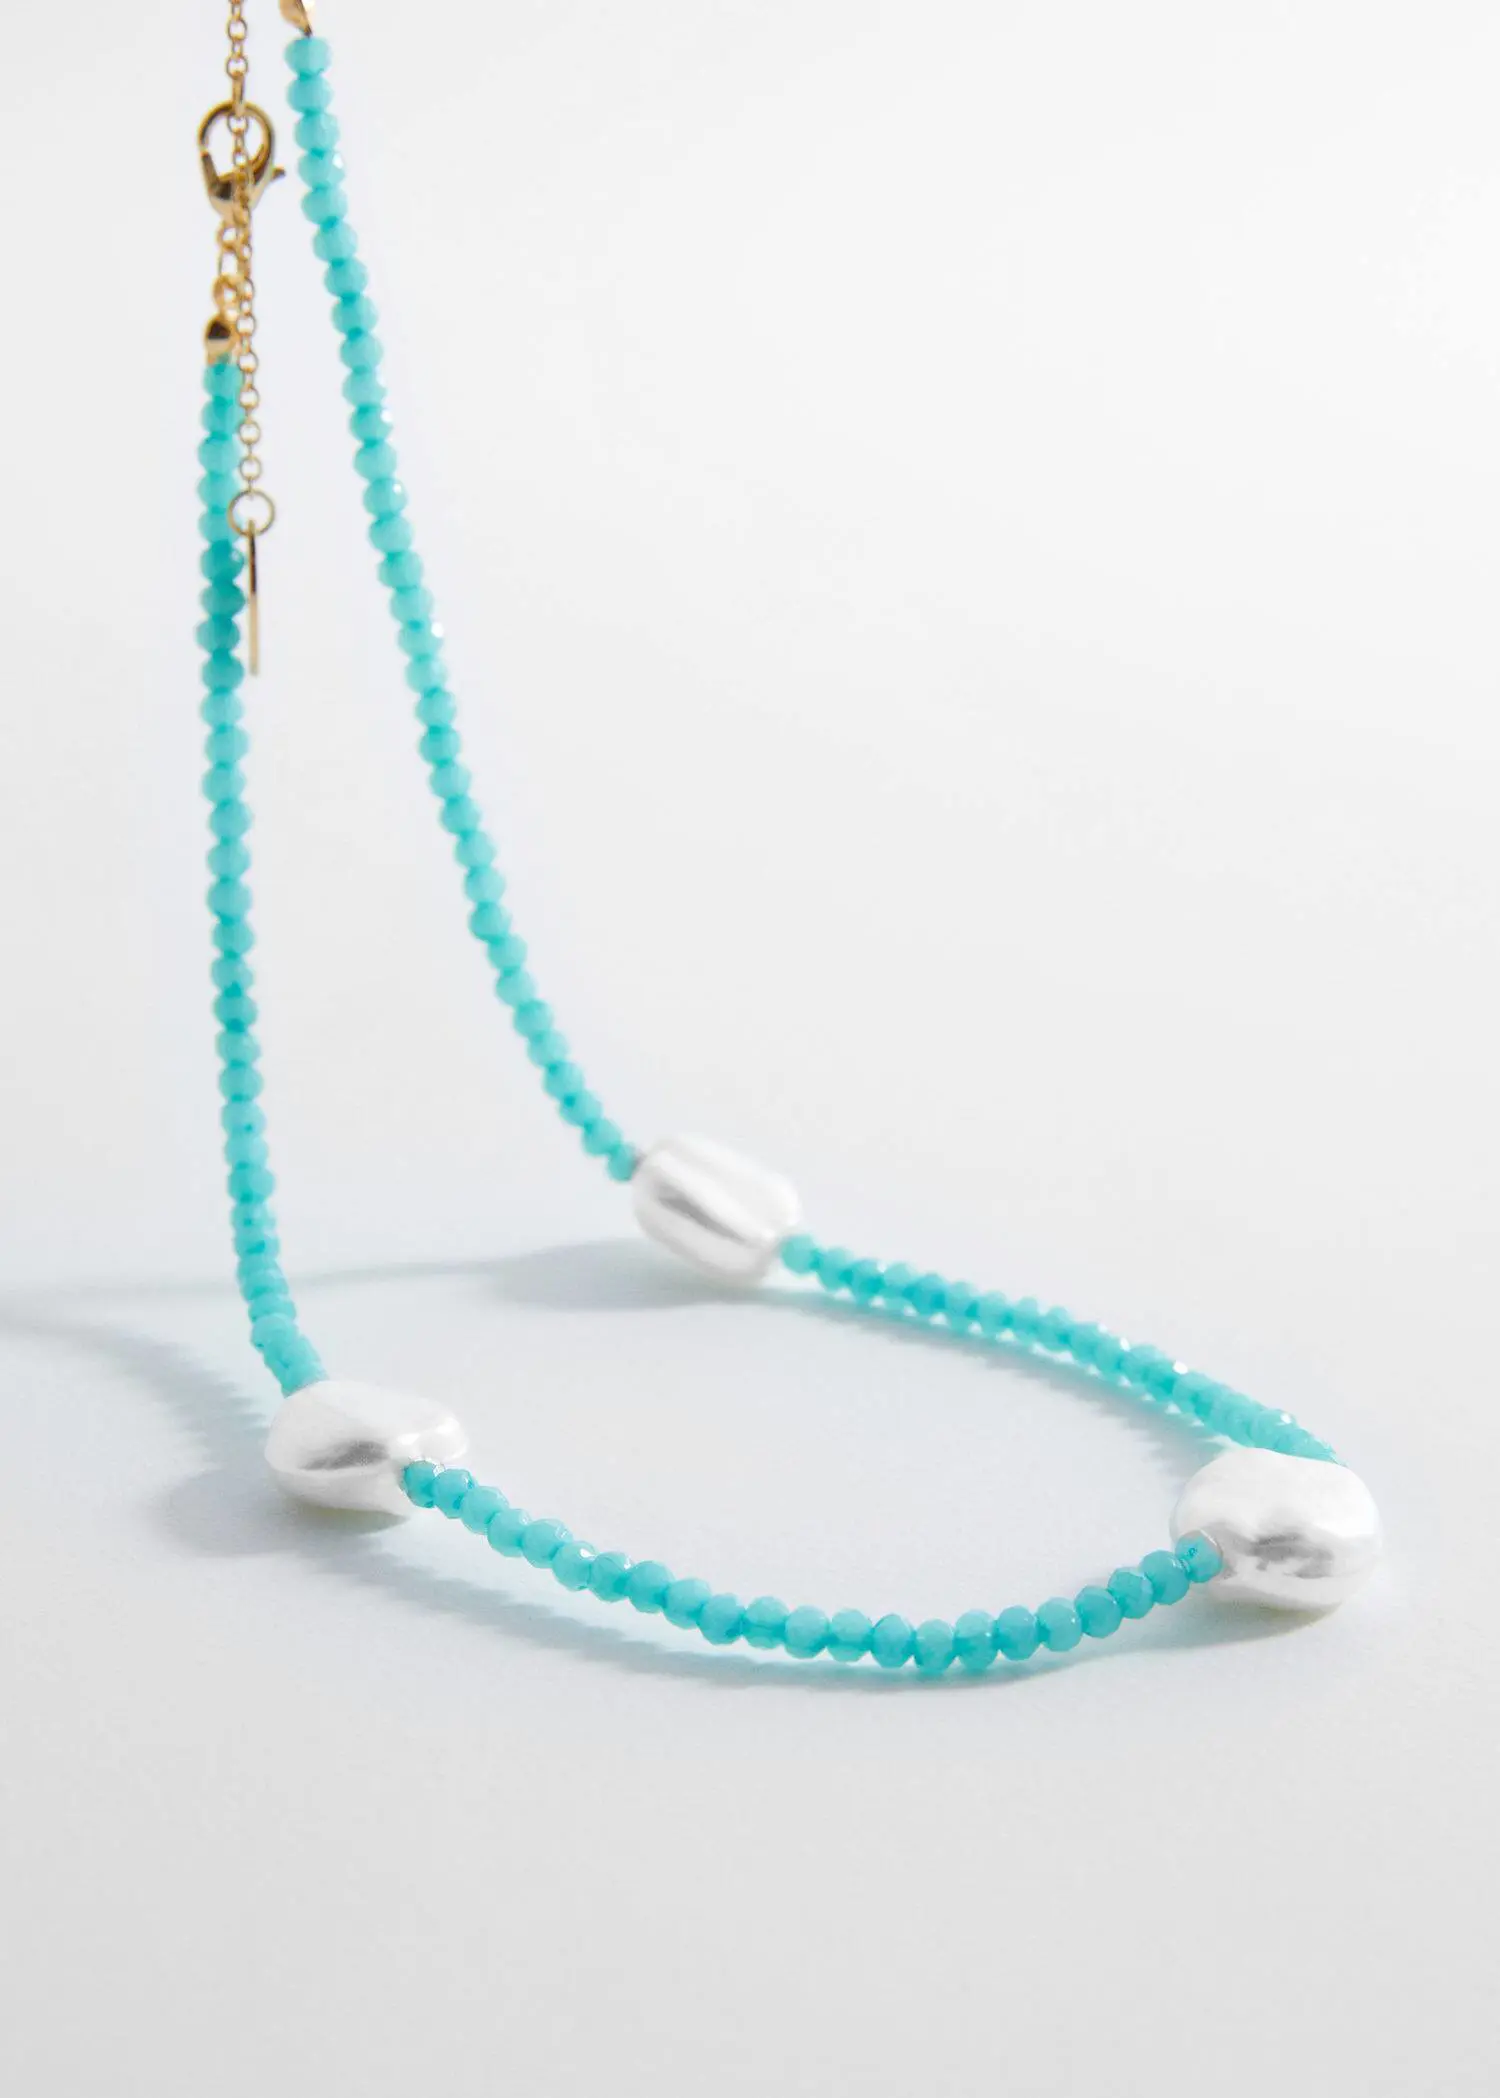 Mango Pearl beads necklace. a necklace with blue beads and white shells. 